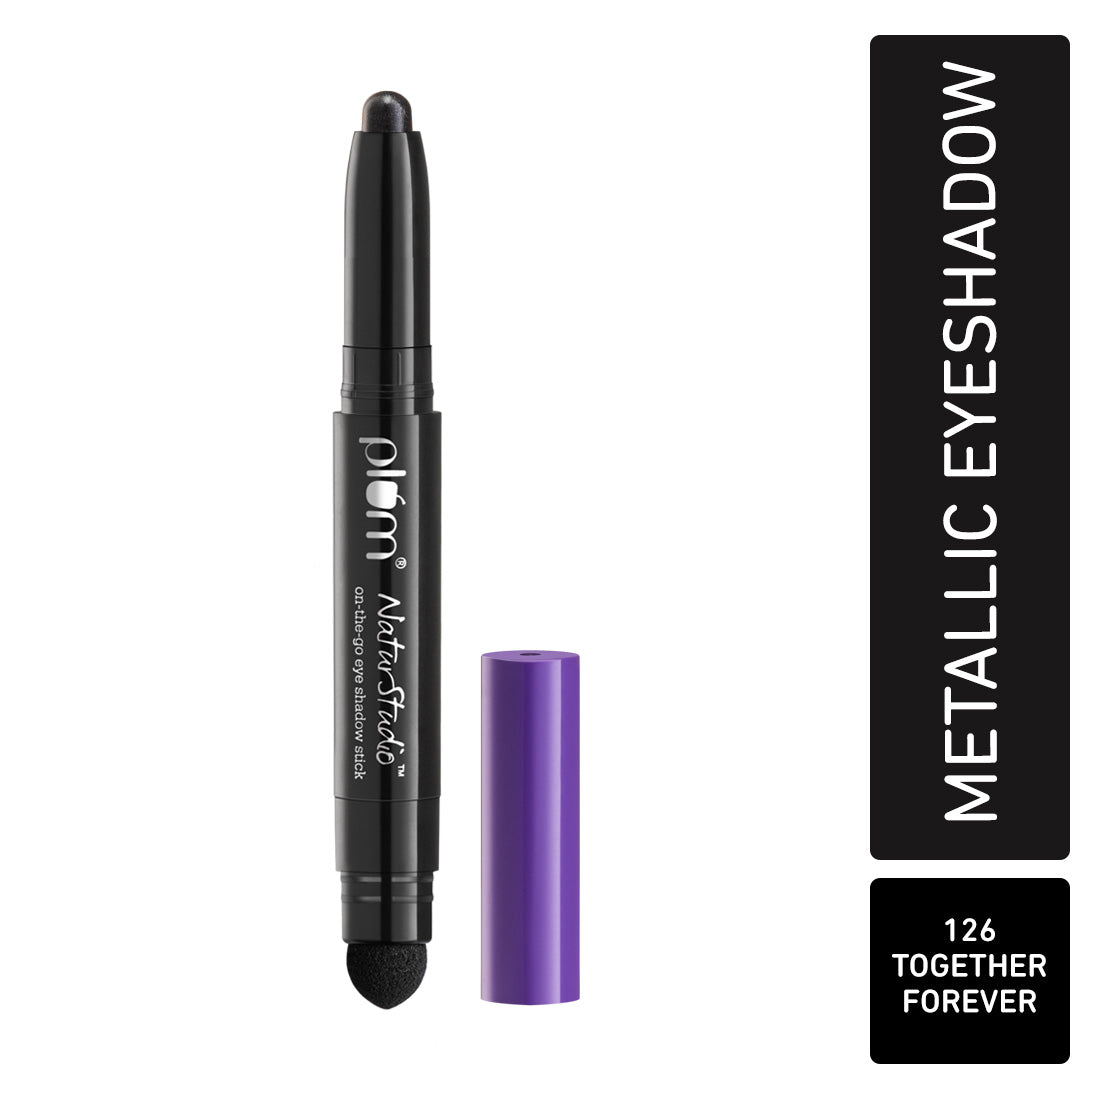 Plum NaturStudio on-the-go Eyeshadow Stick | Waterproof & Crease-proof | Highly Pigmented | With Smudger | Metallic Finish